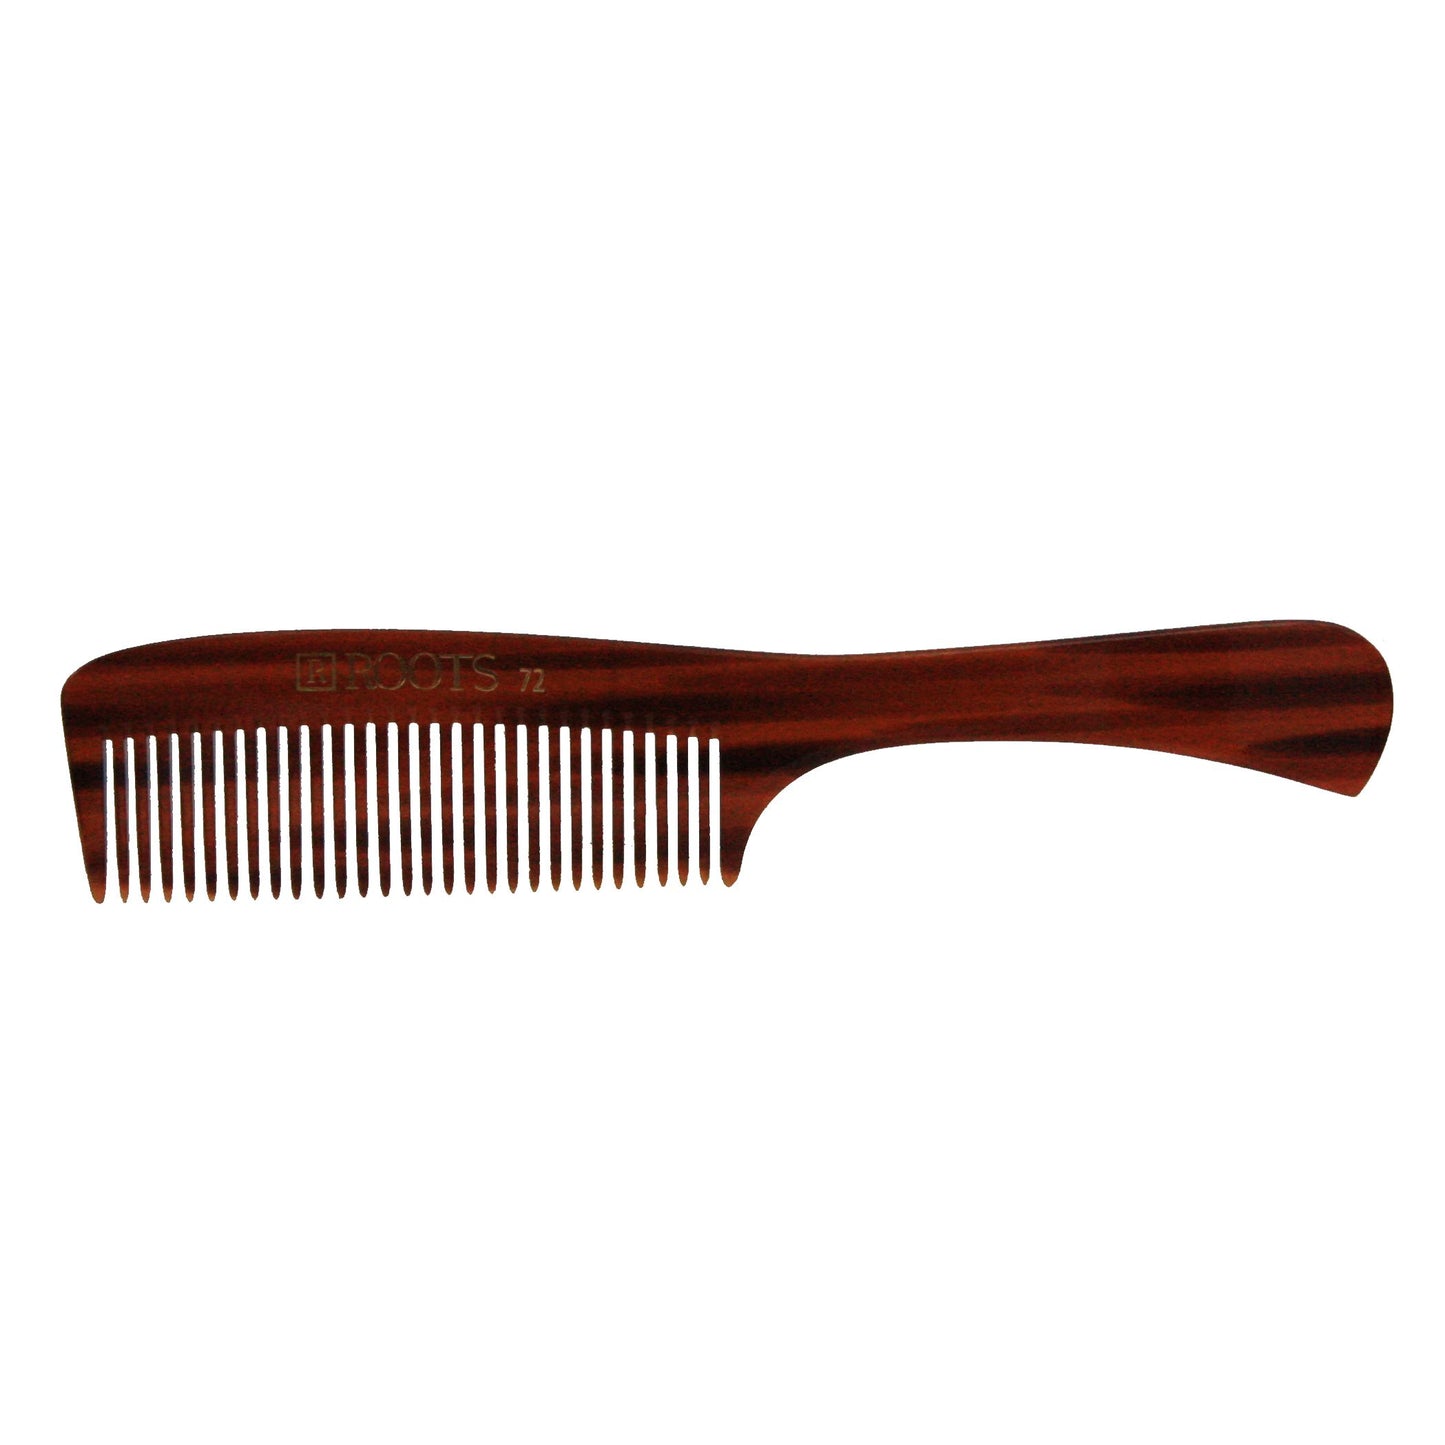 8in Roots 72 Cellulose Acetate Handle Comb - Clearance